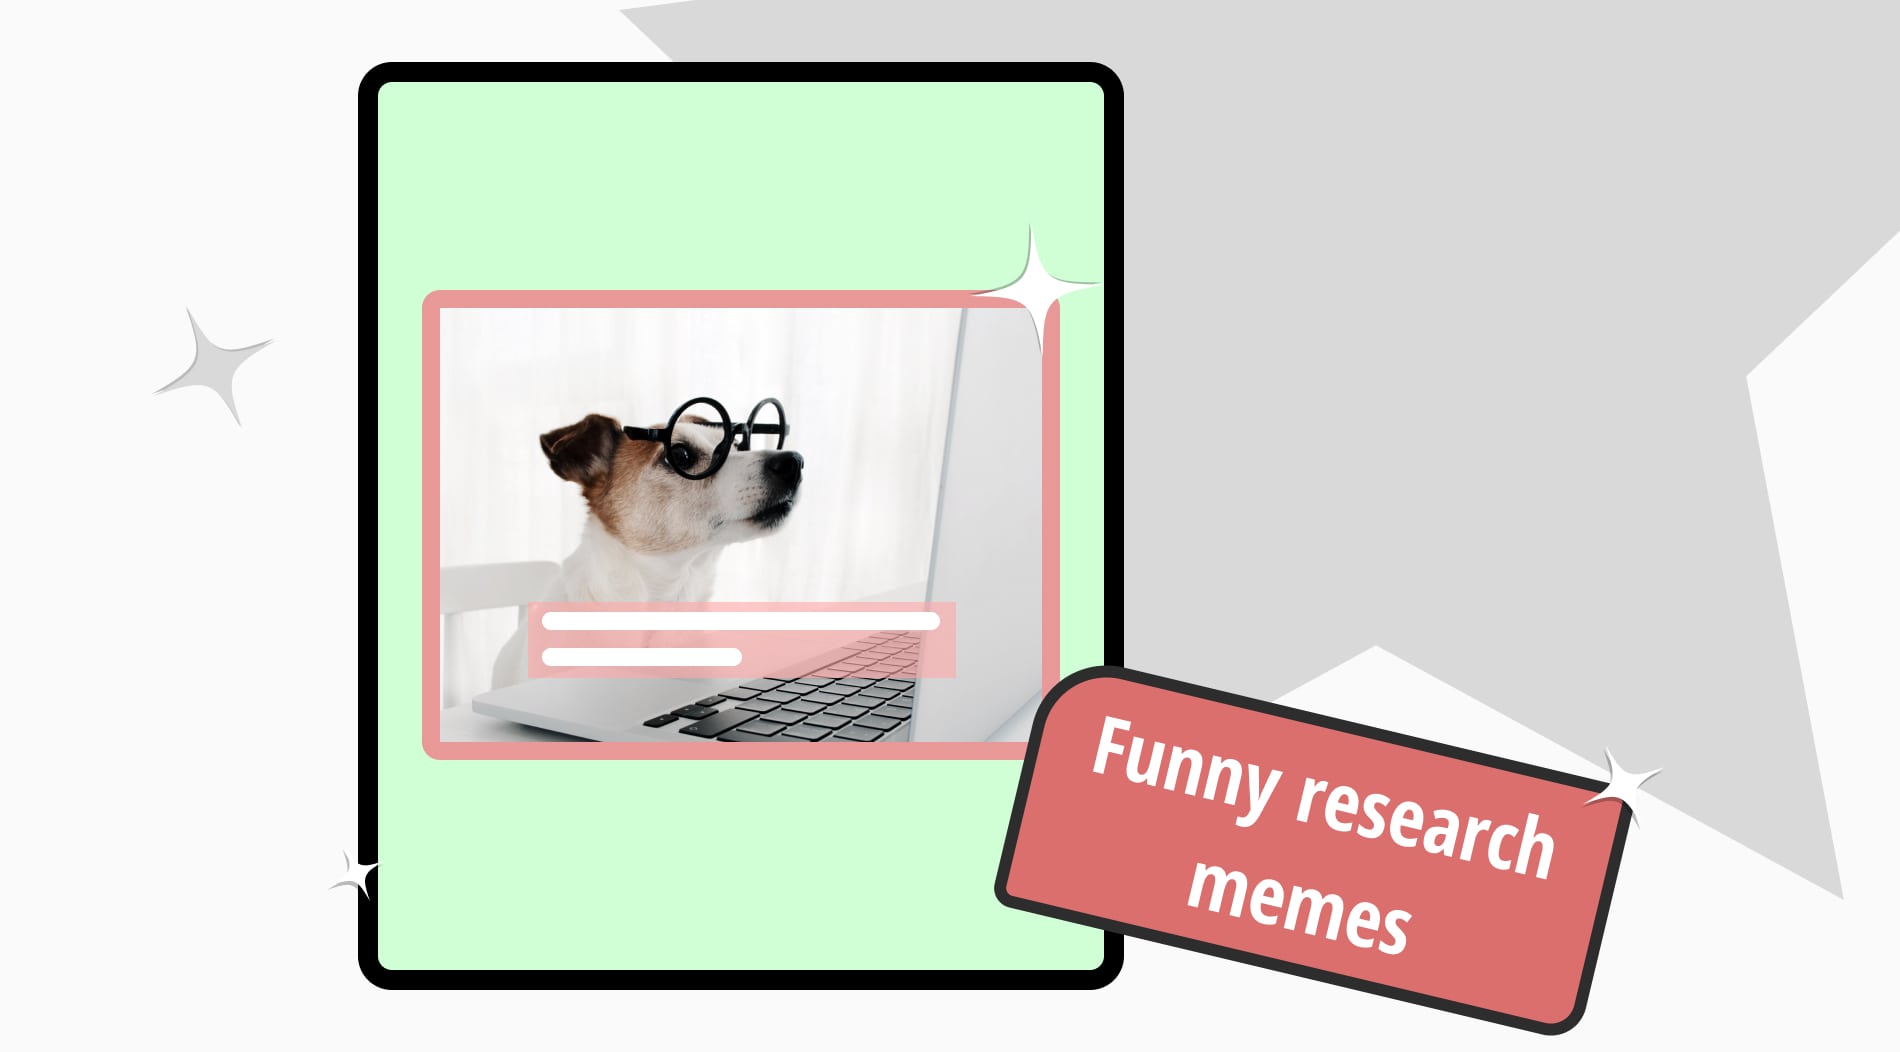 40+ Hilarious research memes that will make you smile